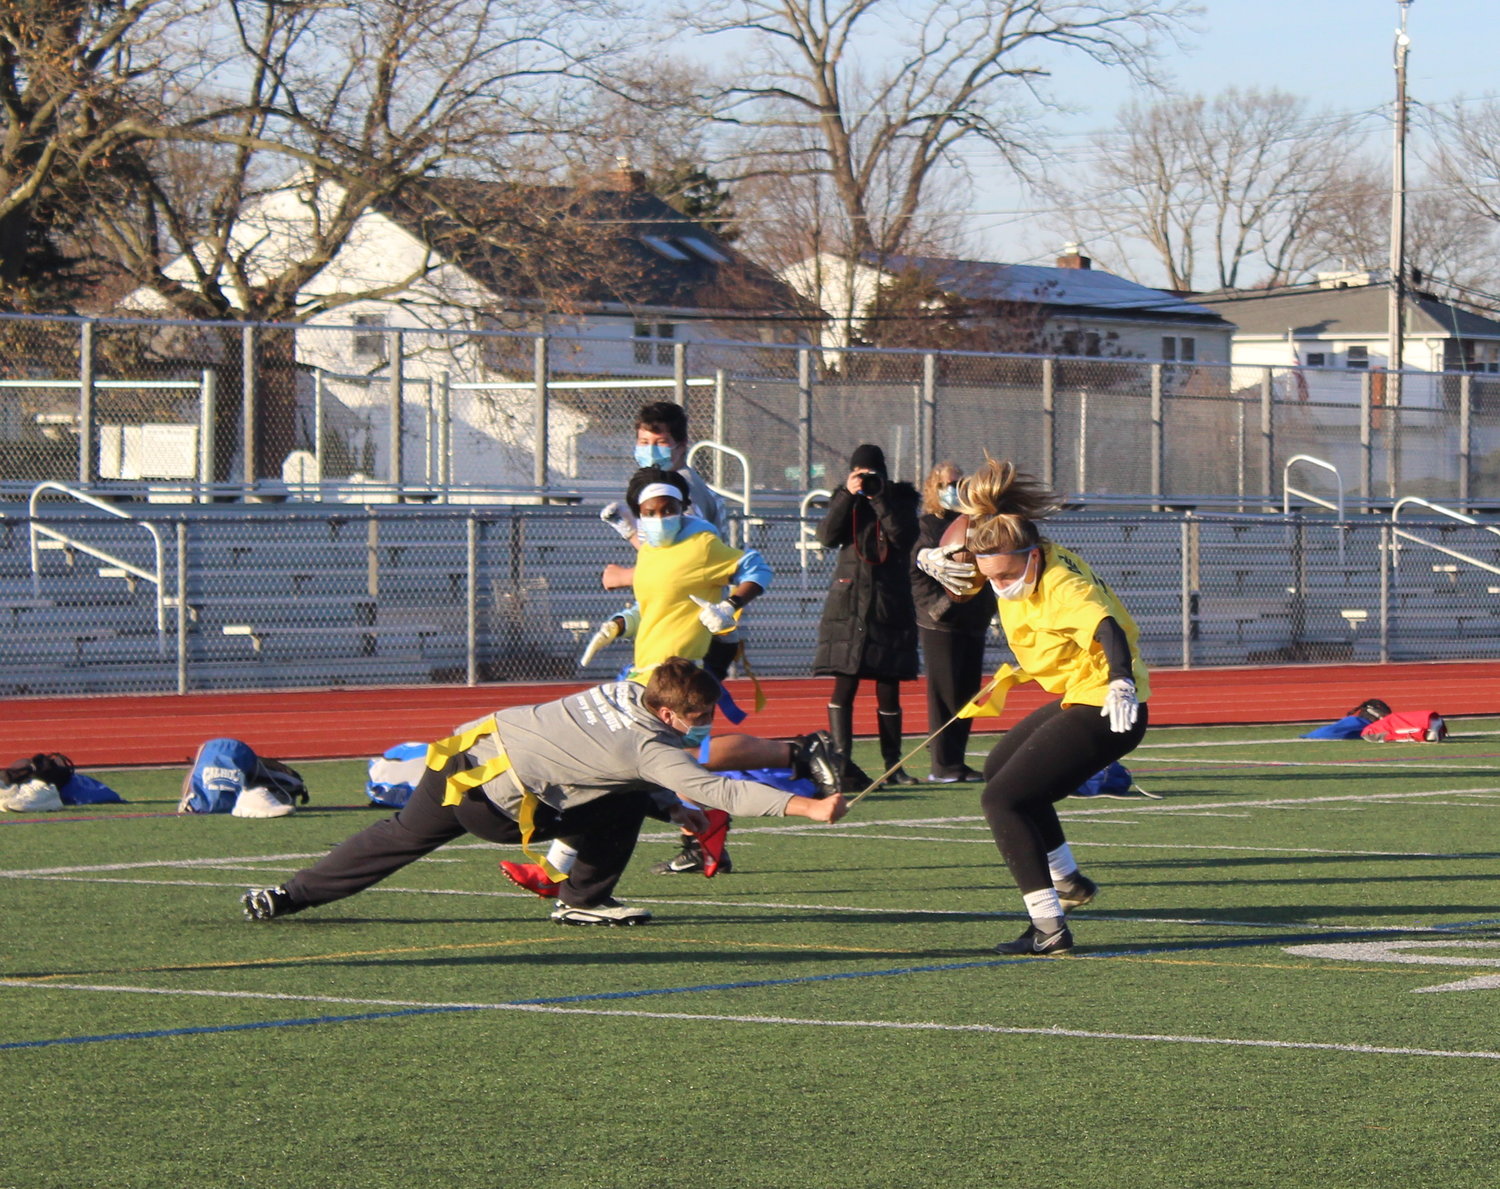 Calhoun’s kicker, senior Nicole Devlin, right, attempted to evade her opponent during one of the games.